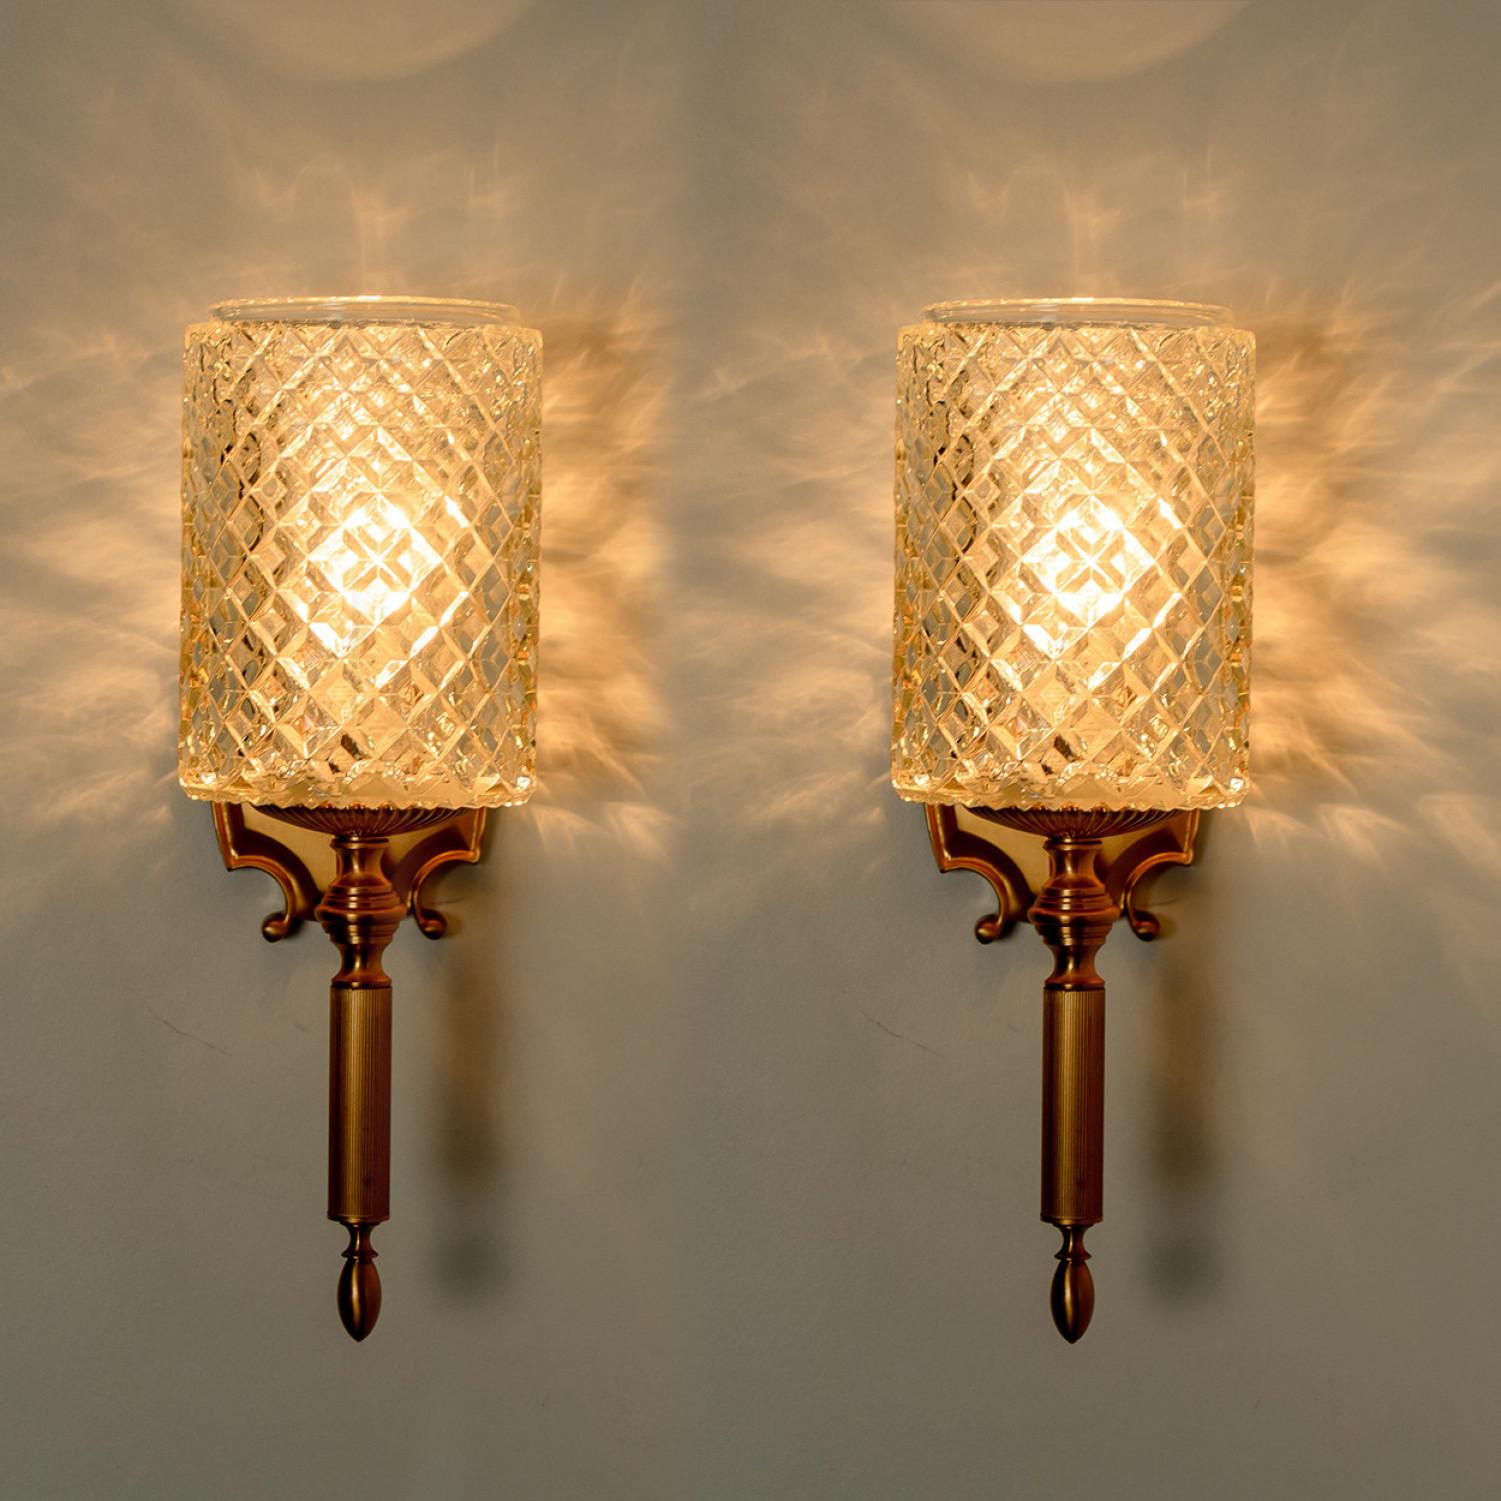 Textured Glass and Brass Wall Lights, Germany, 1960s For Sale 4